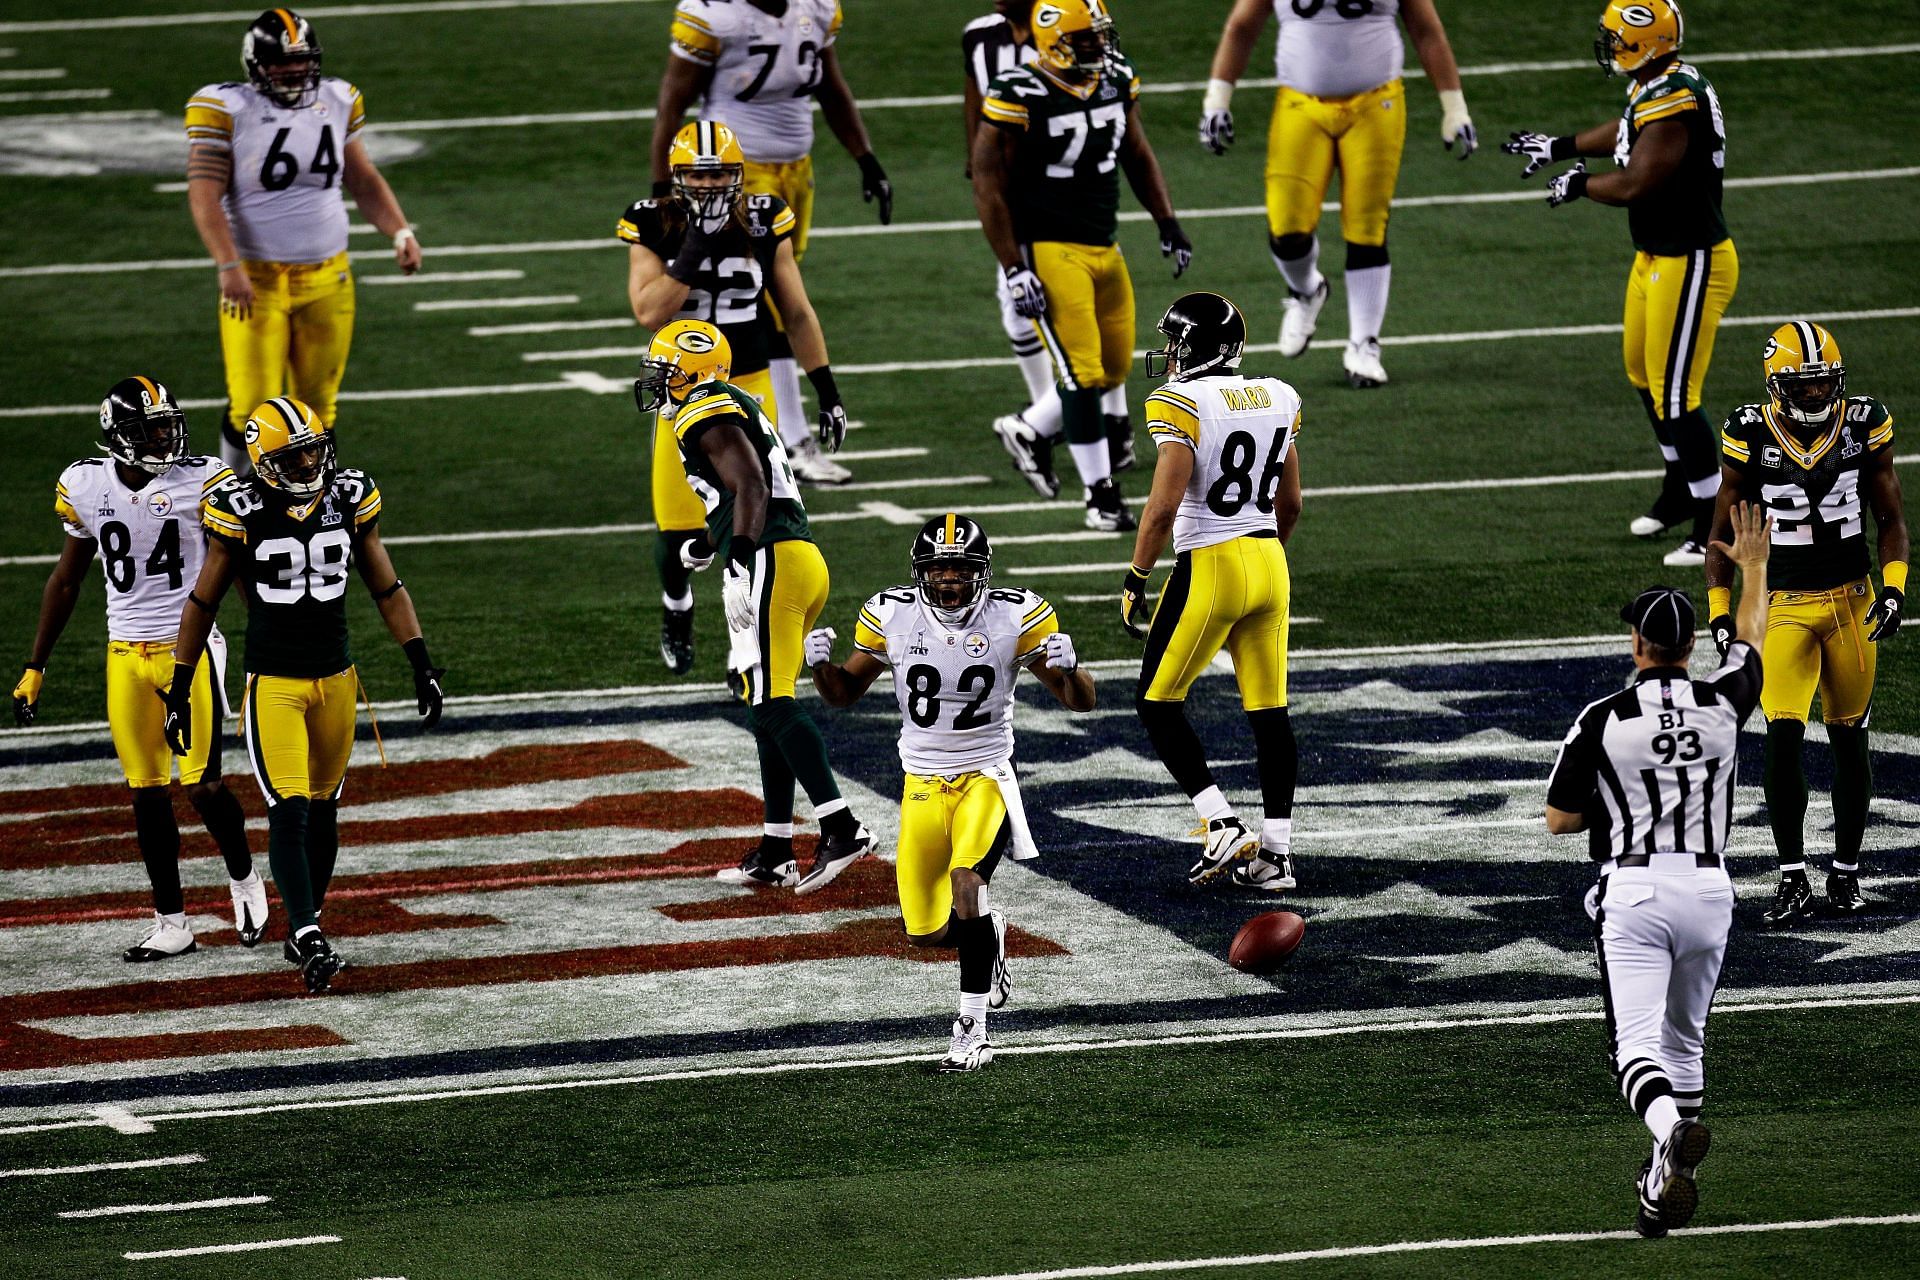 Antwaan Randle El of the Pittsburgh Steelers reacts after catching a 13-yard pass against the Green Bay Packers in the second quarter during Super Bowl XLV